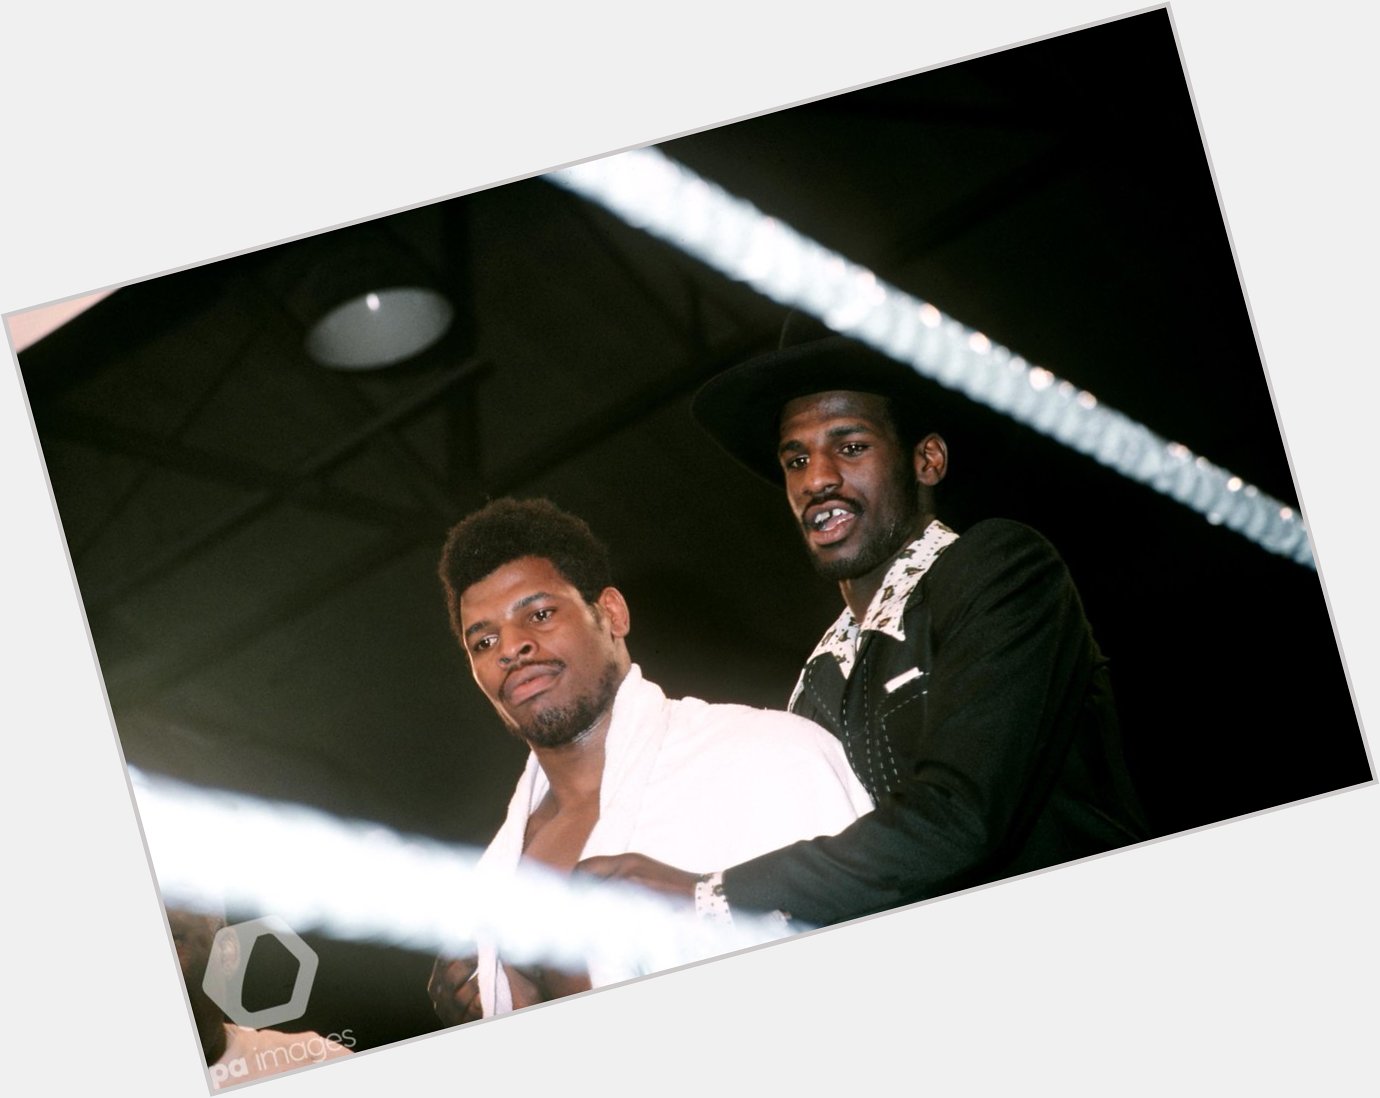 Happy 66th birthday Leon Spinks (left) - who beat Muhammad Ali to win the world heavyweight title in 1978. 